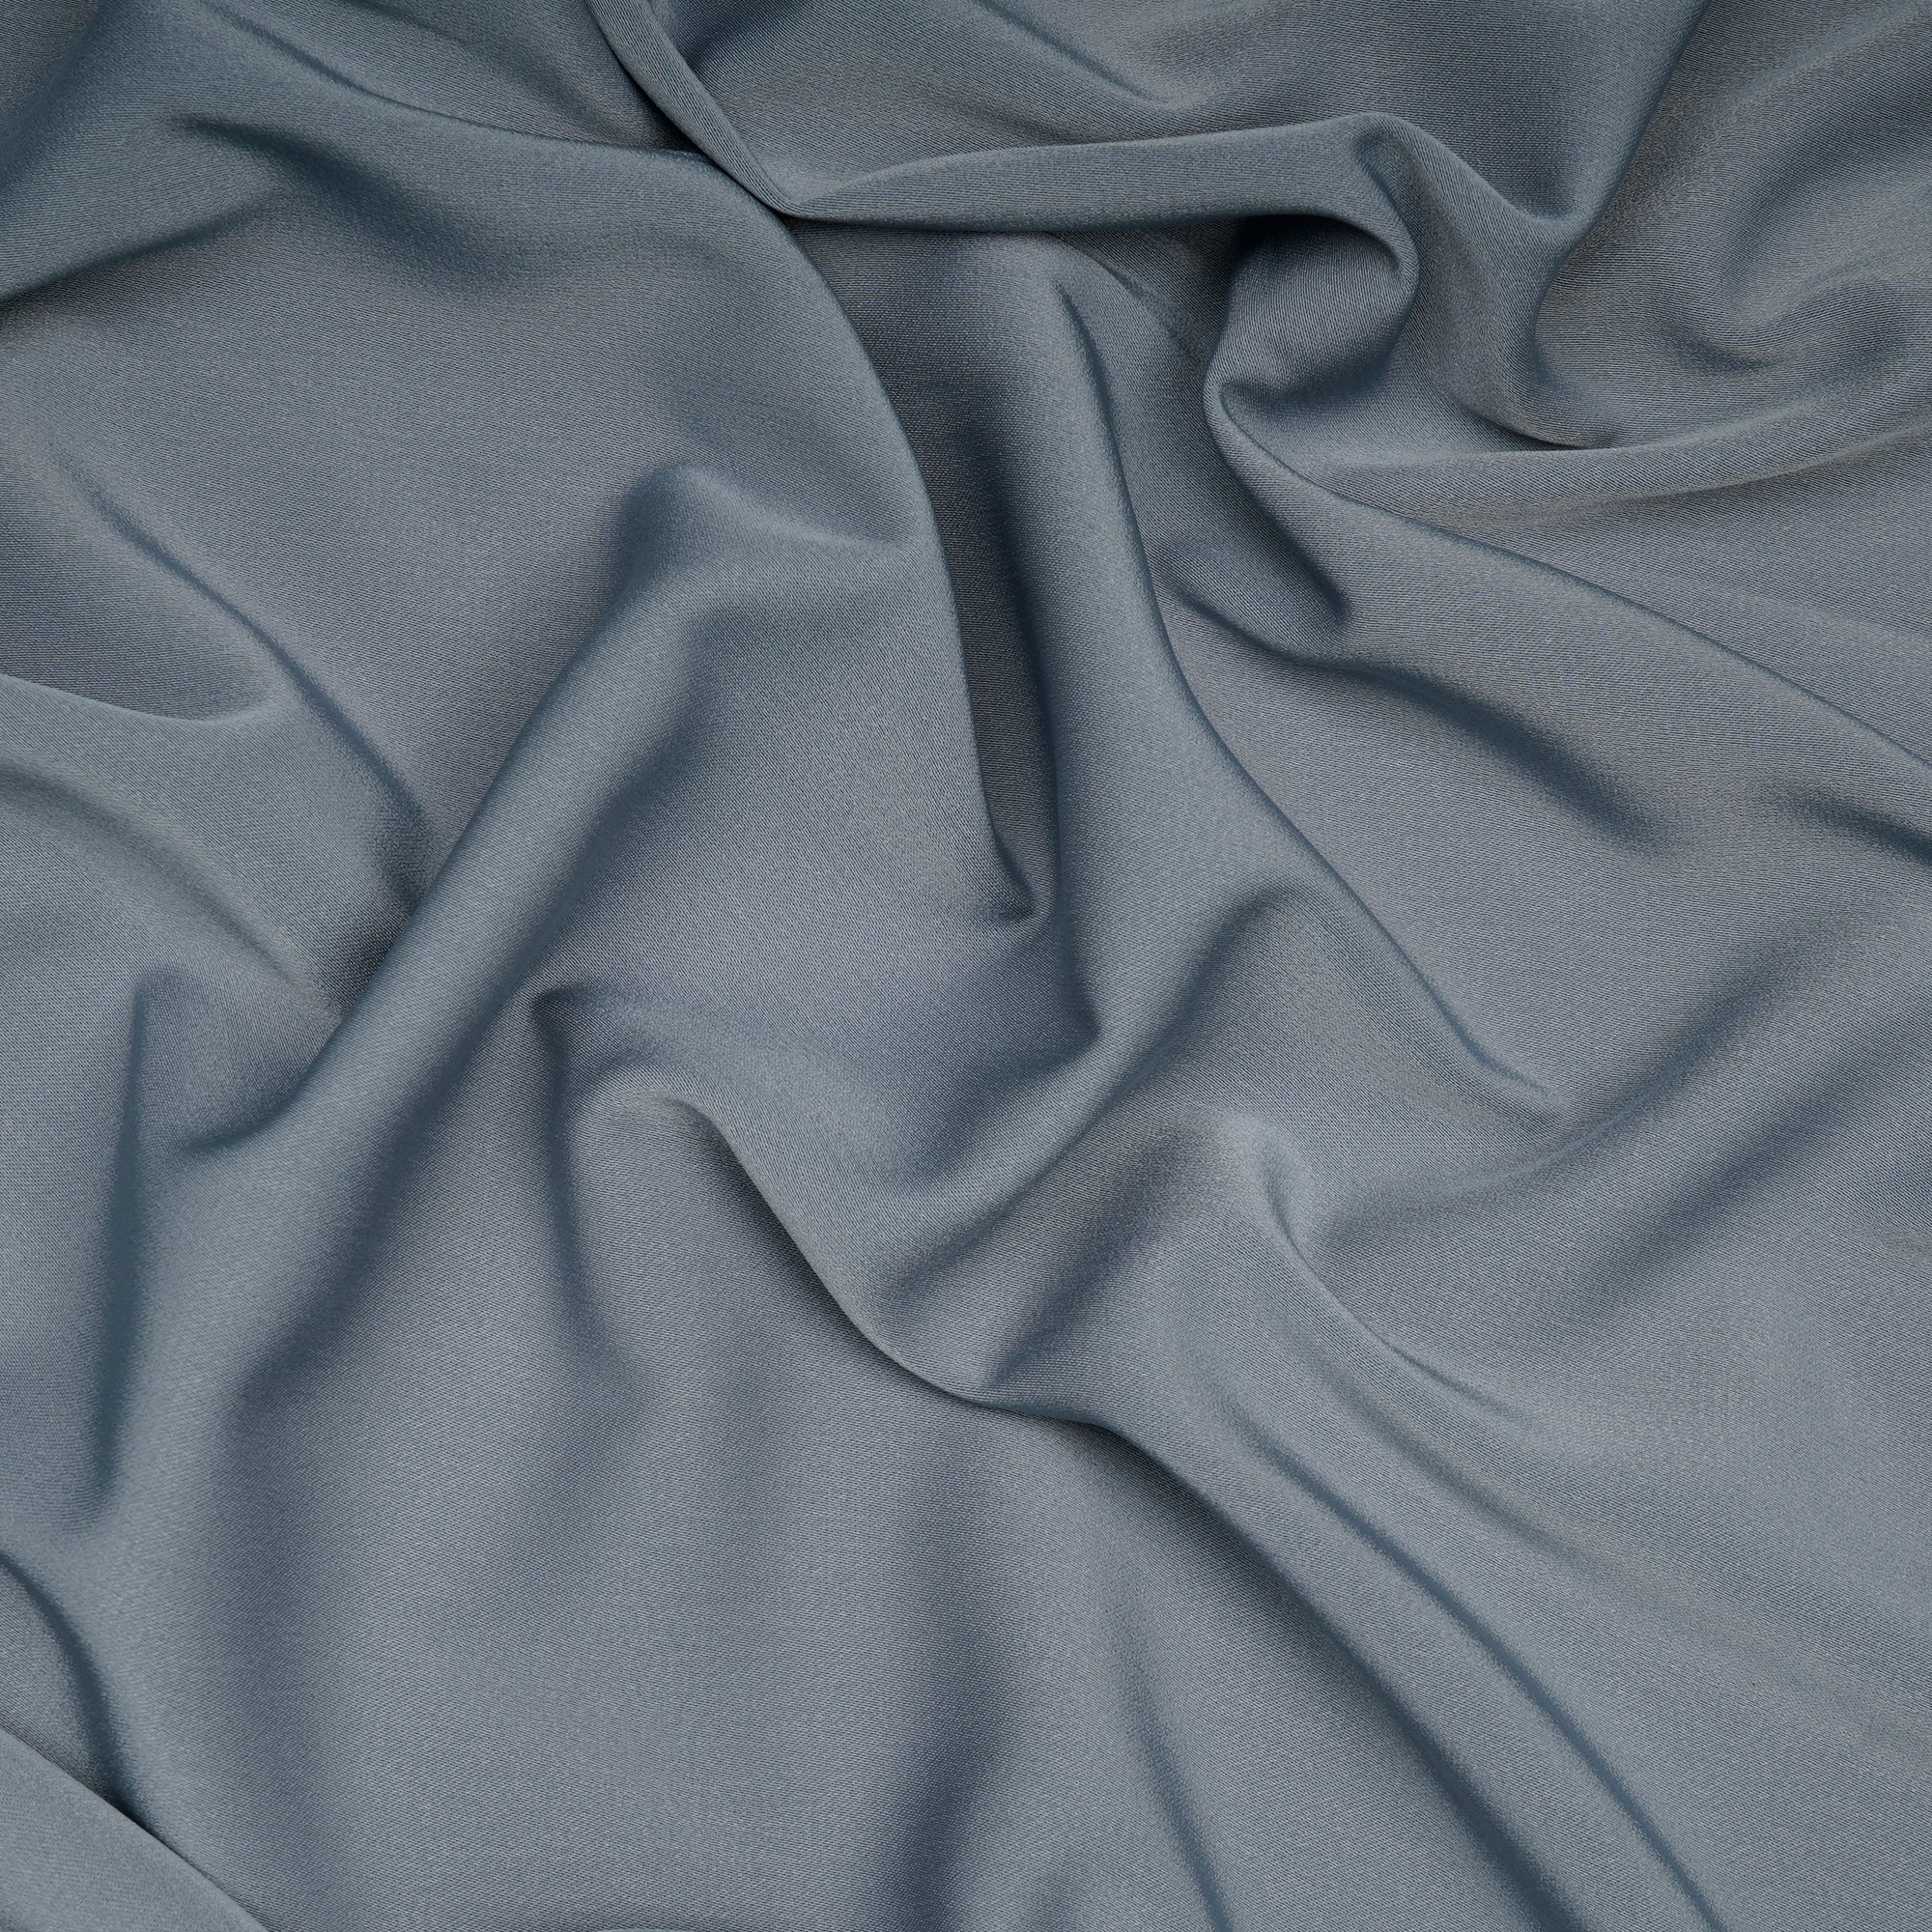 Quarry Solid Dyed Imported Prada Crepe Fabric (60" Width)